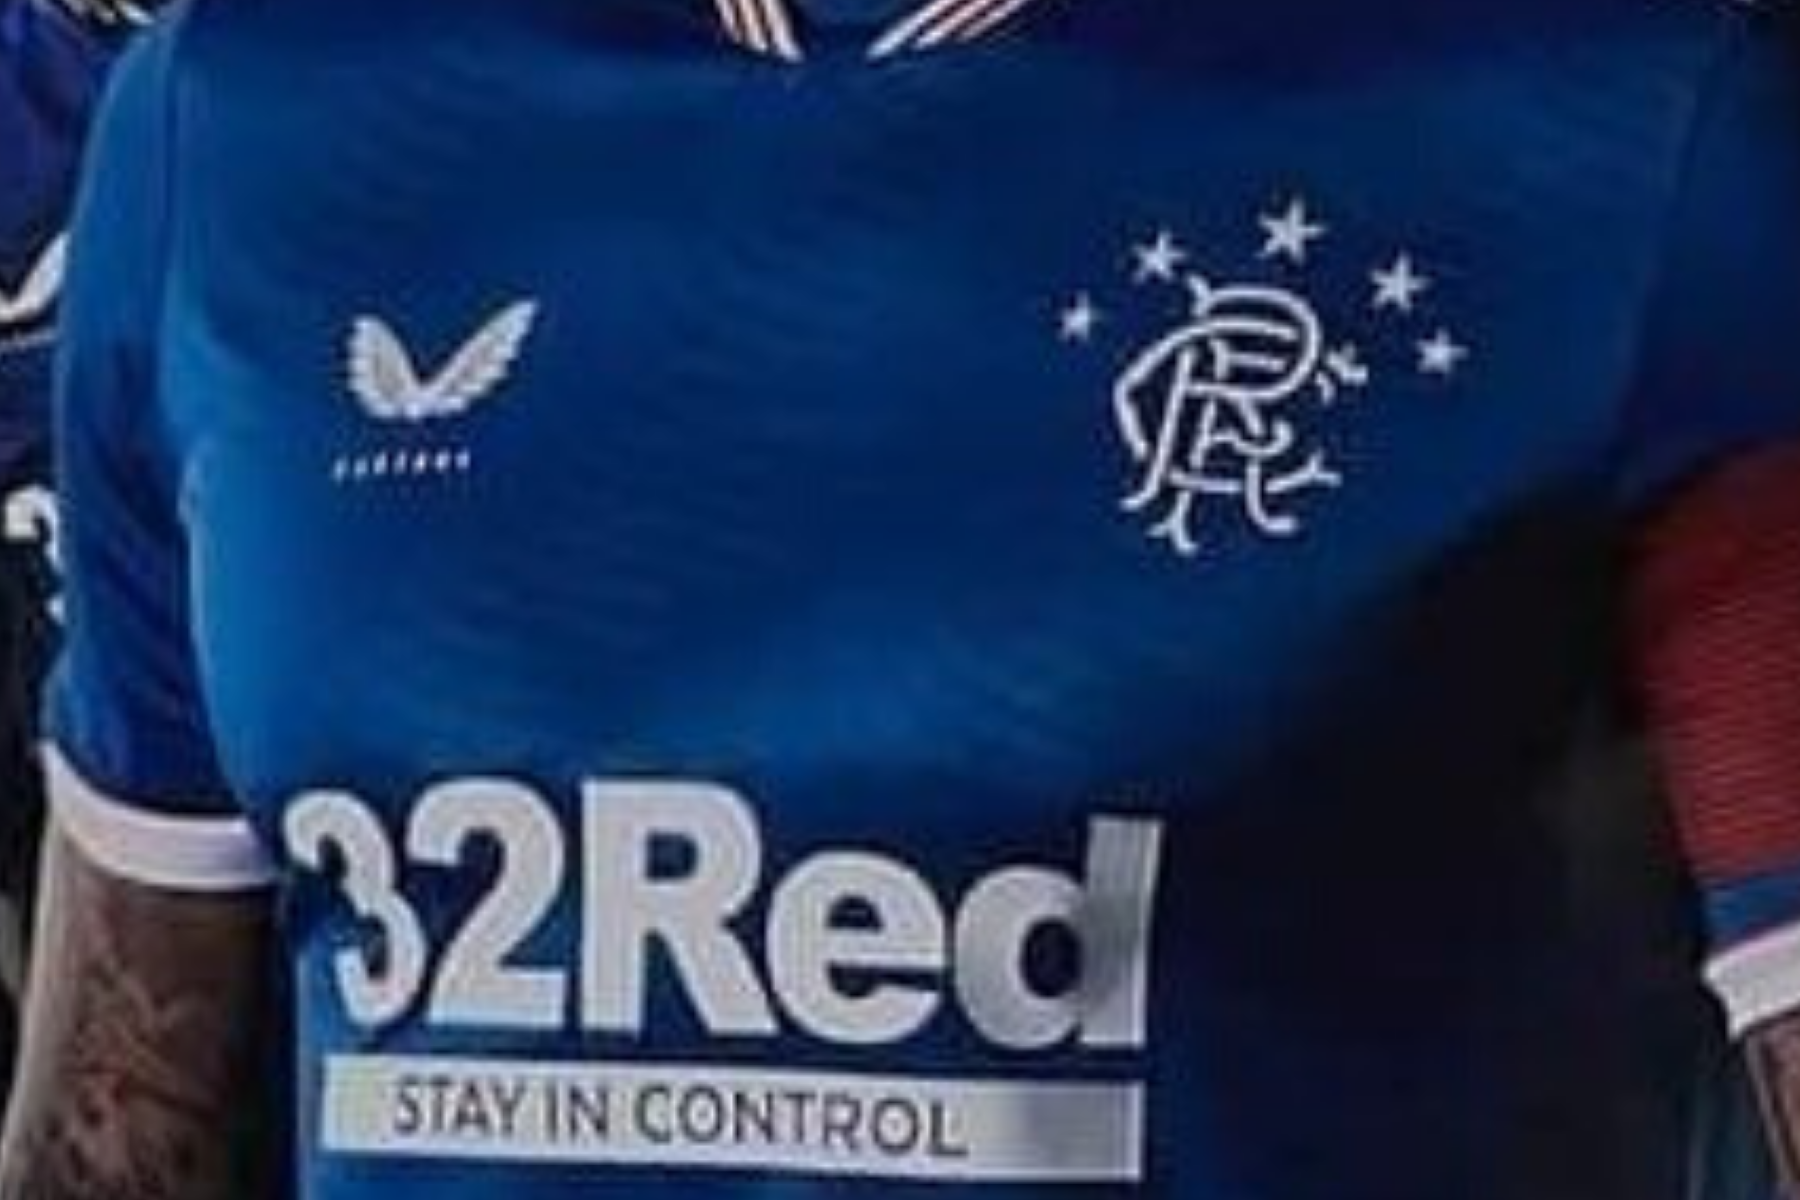 Rangers new kit teased as leaked picture of Castore strip emerges online